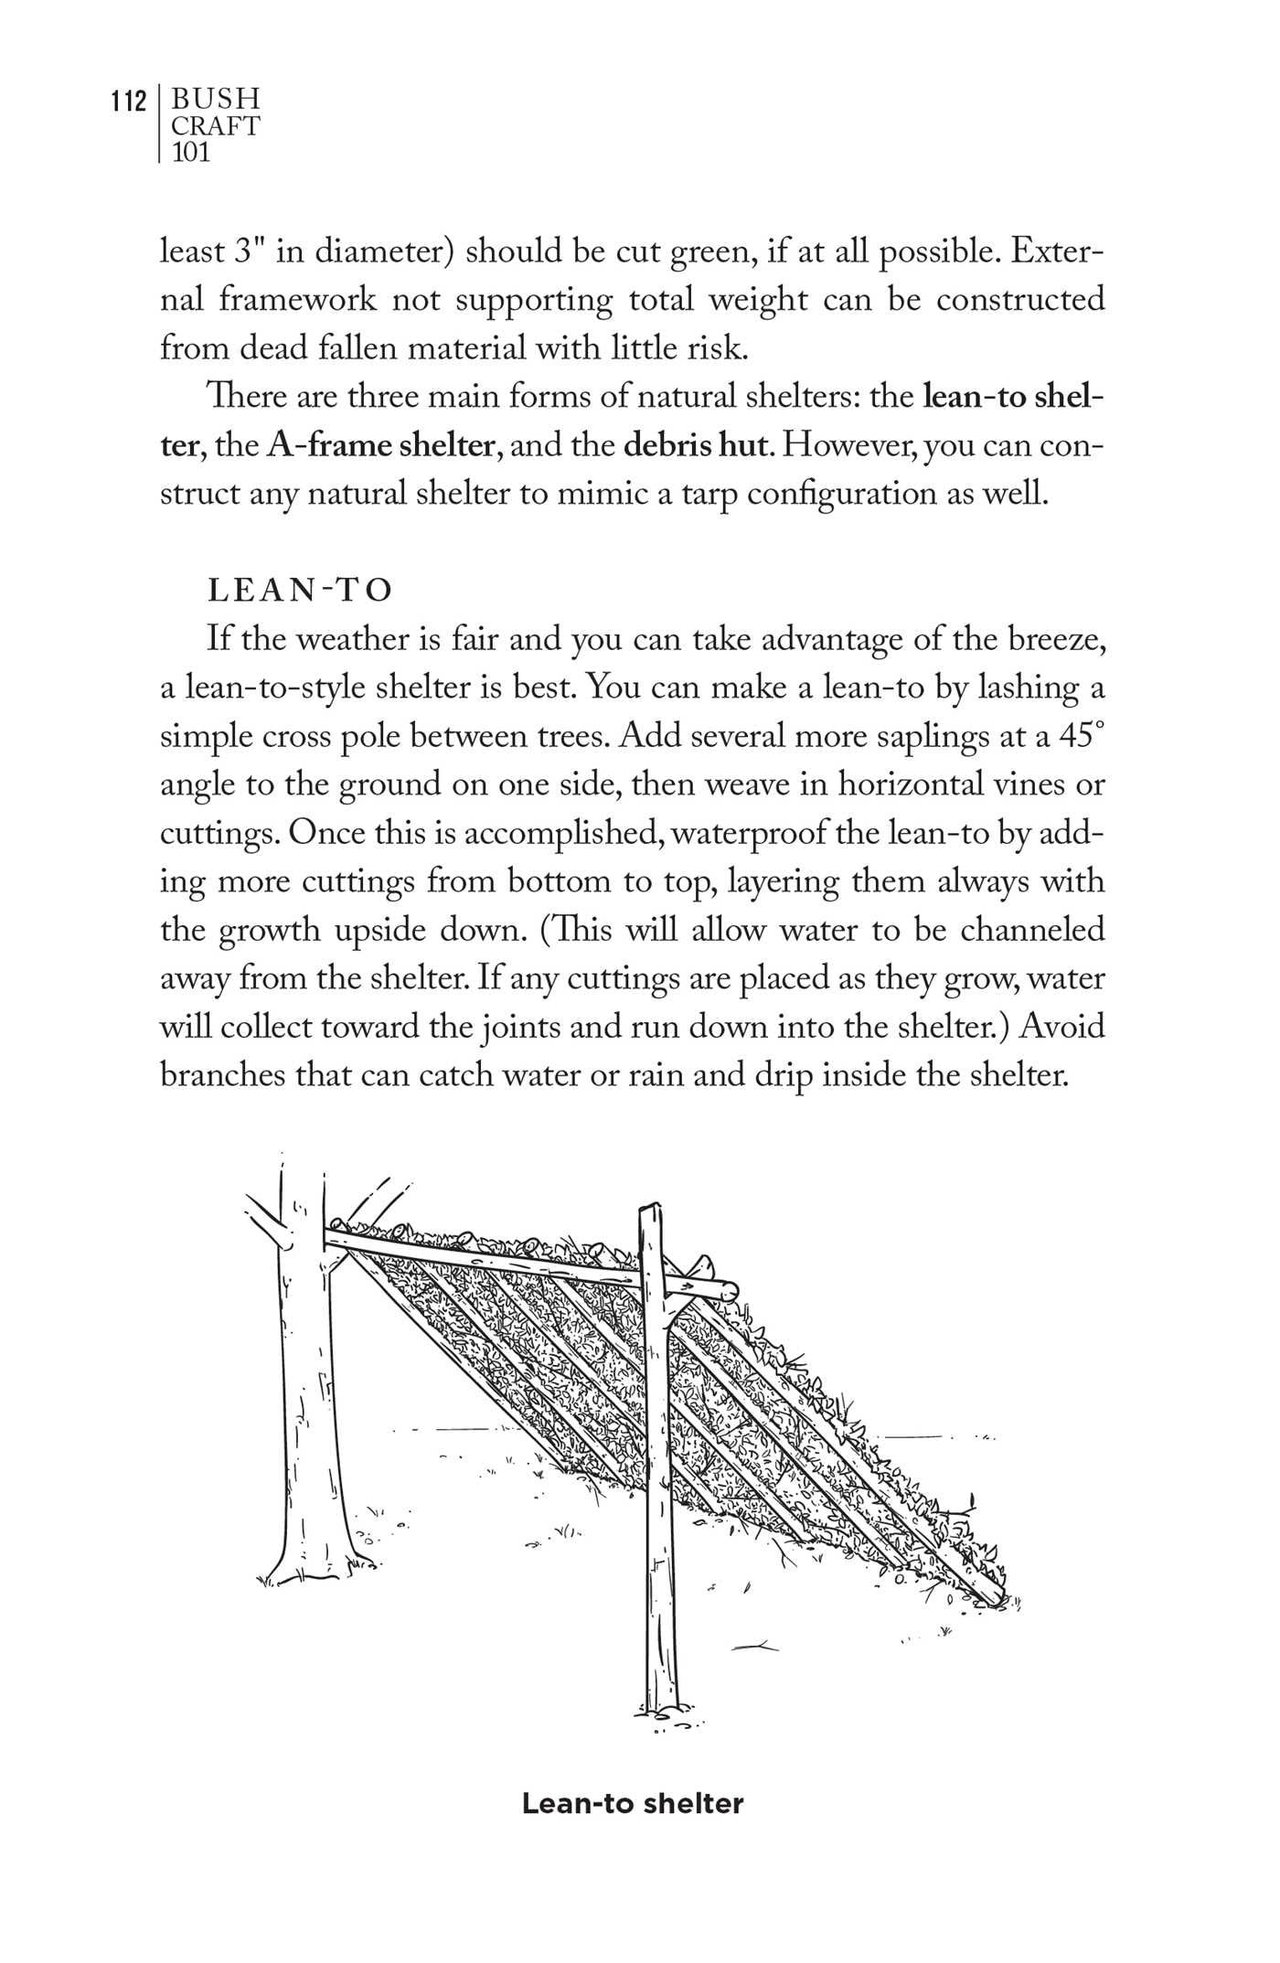 5 Bushcraft 101: A Field Guide to the Art of Wilderness Survival